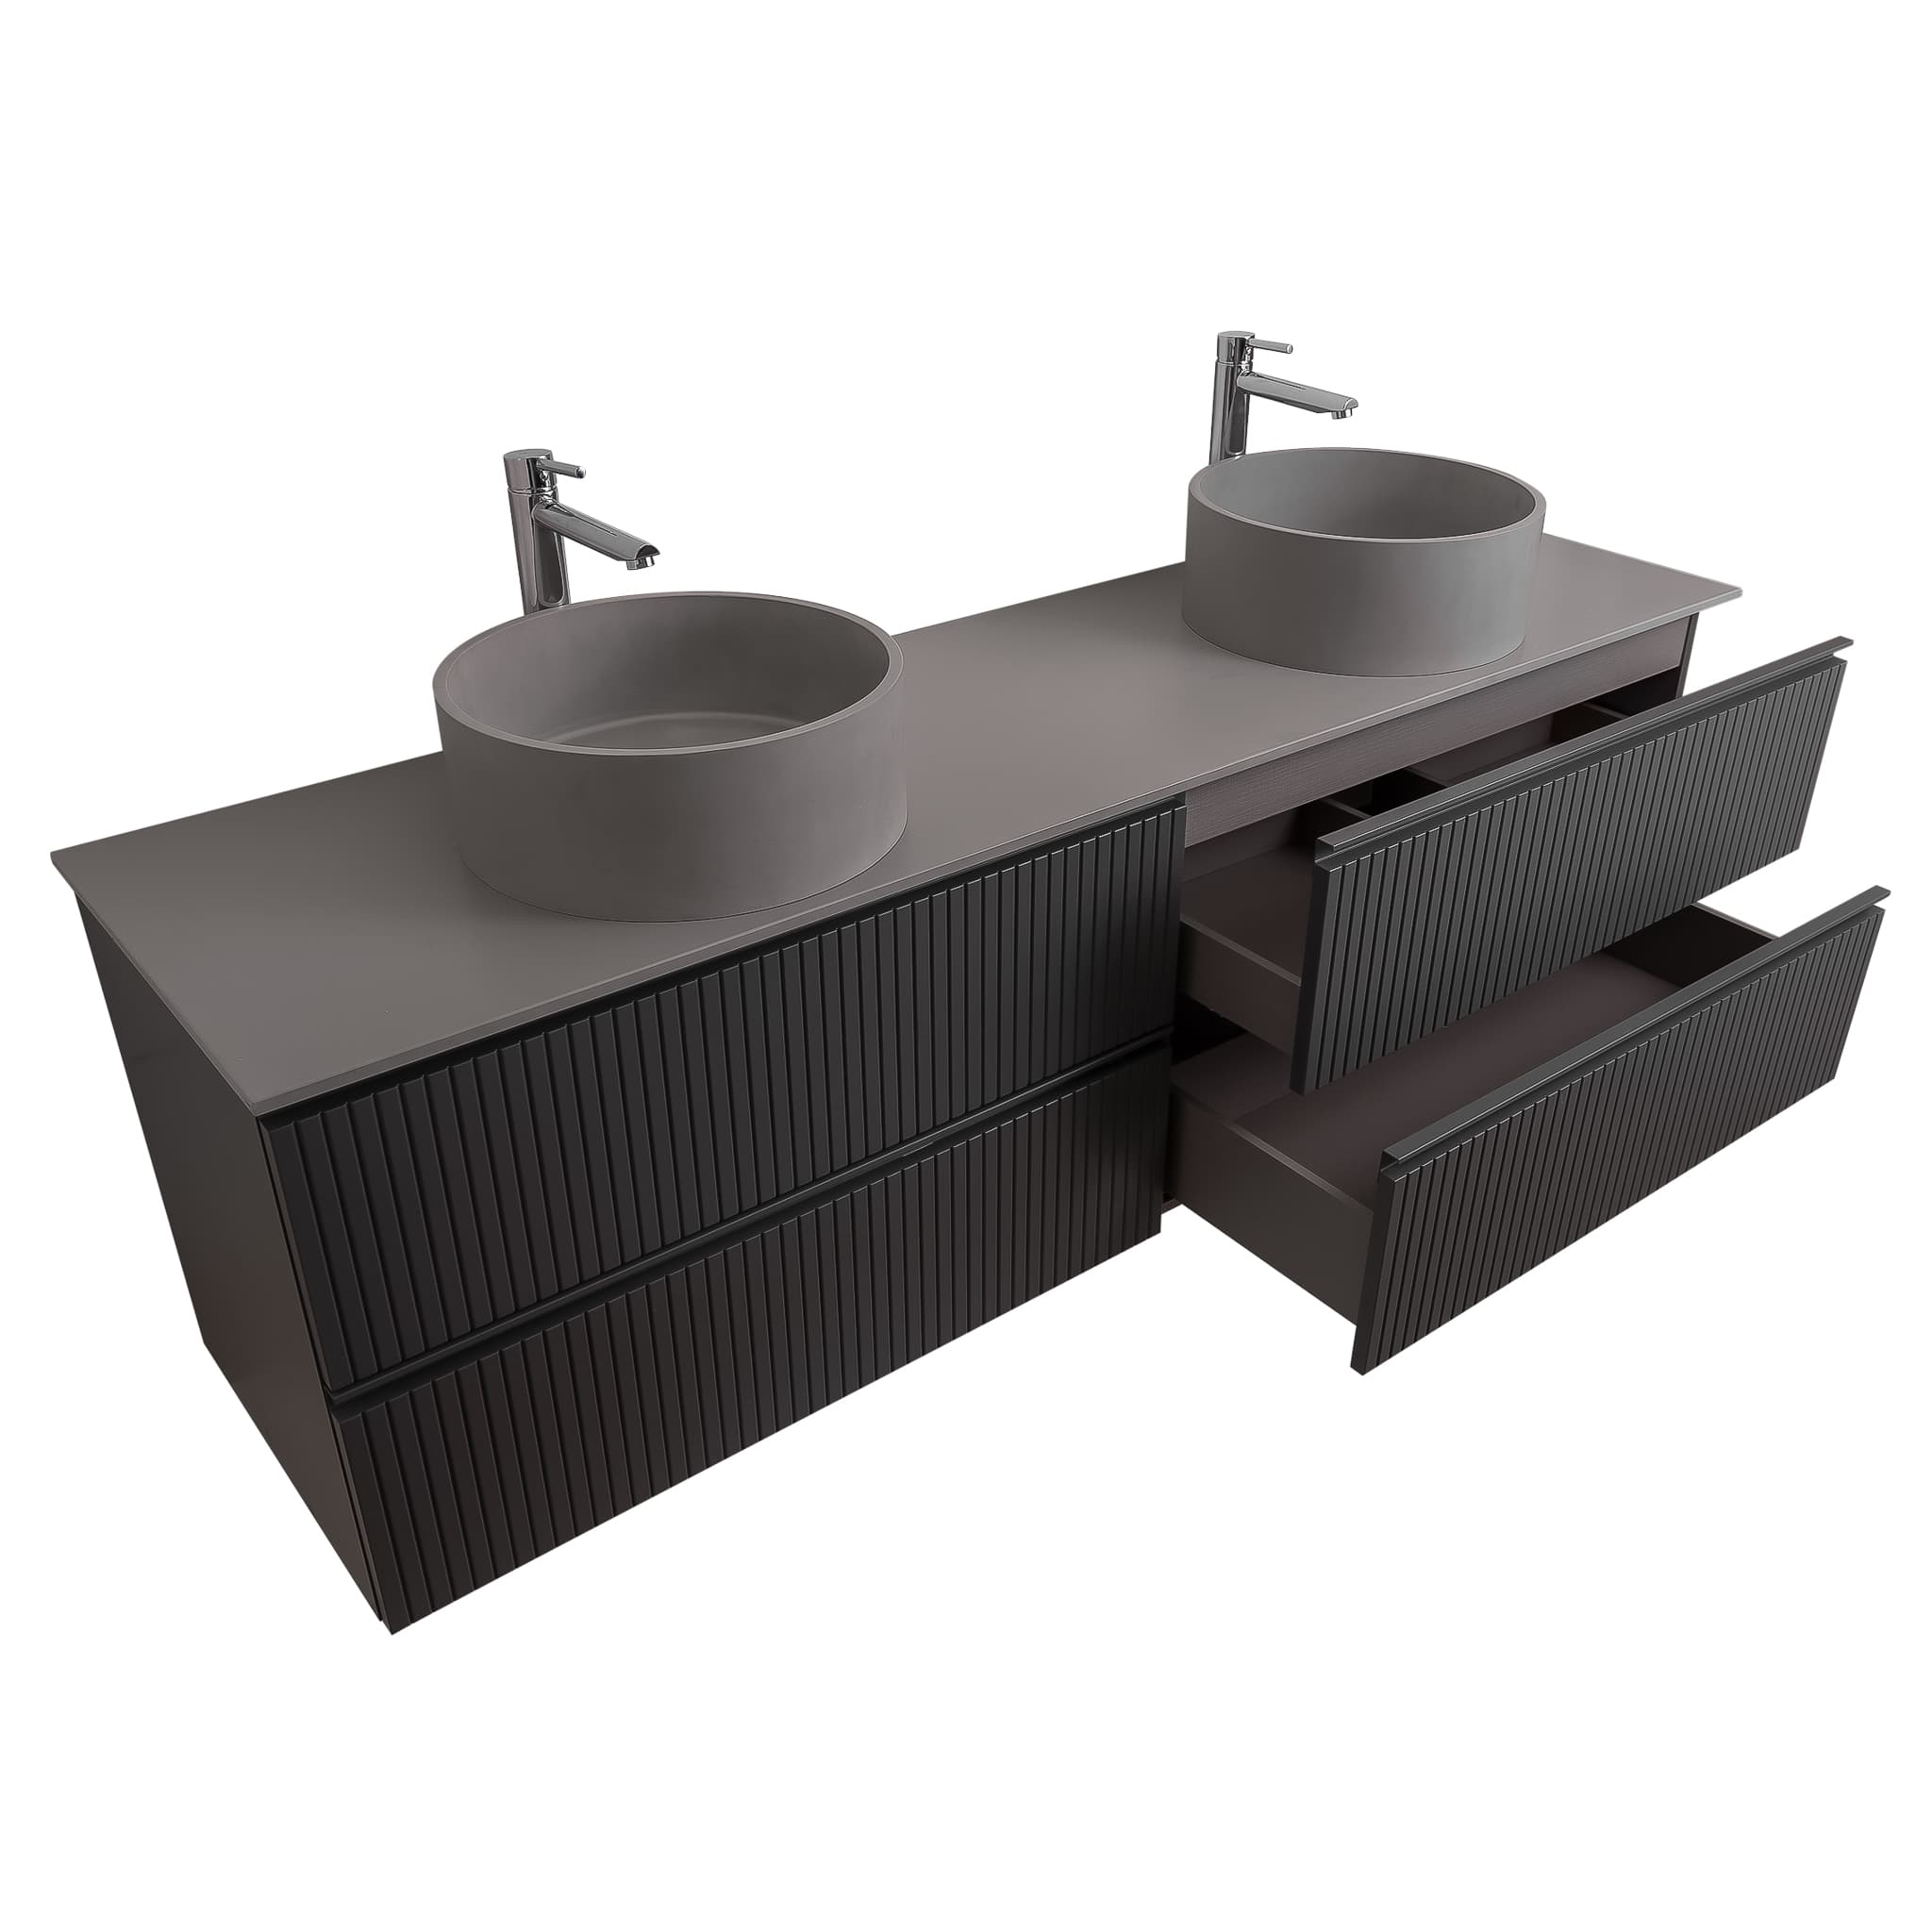 Ares 63 Matte Grey Cabinet, Solid Surface Flat Grey Counter And Two Round Solid Surface Grey Basin 1386, Wall Mounted Modern Vanity Set